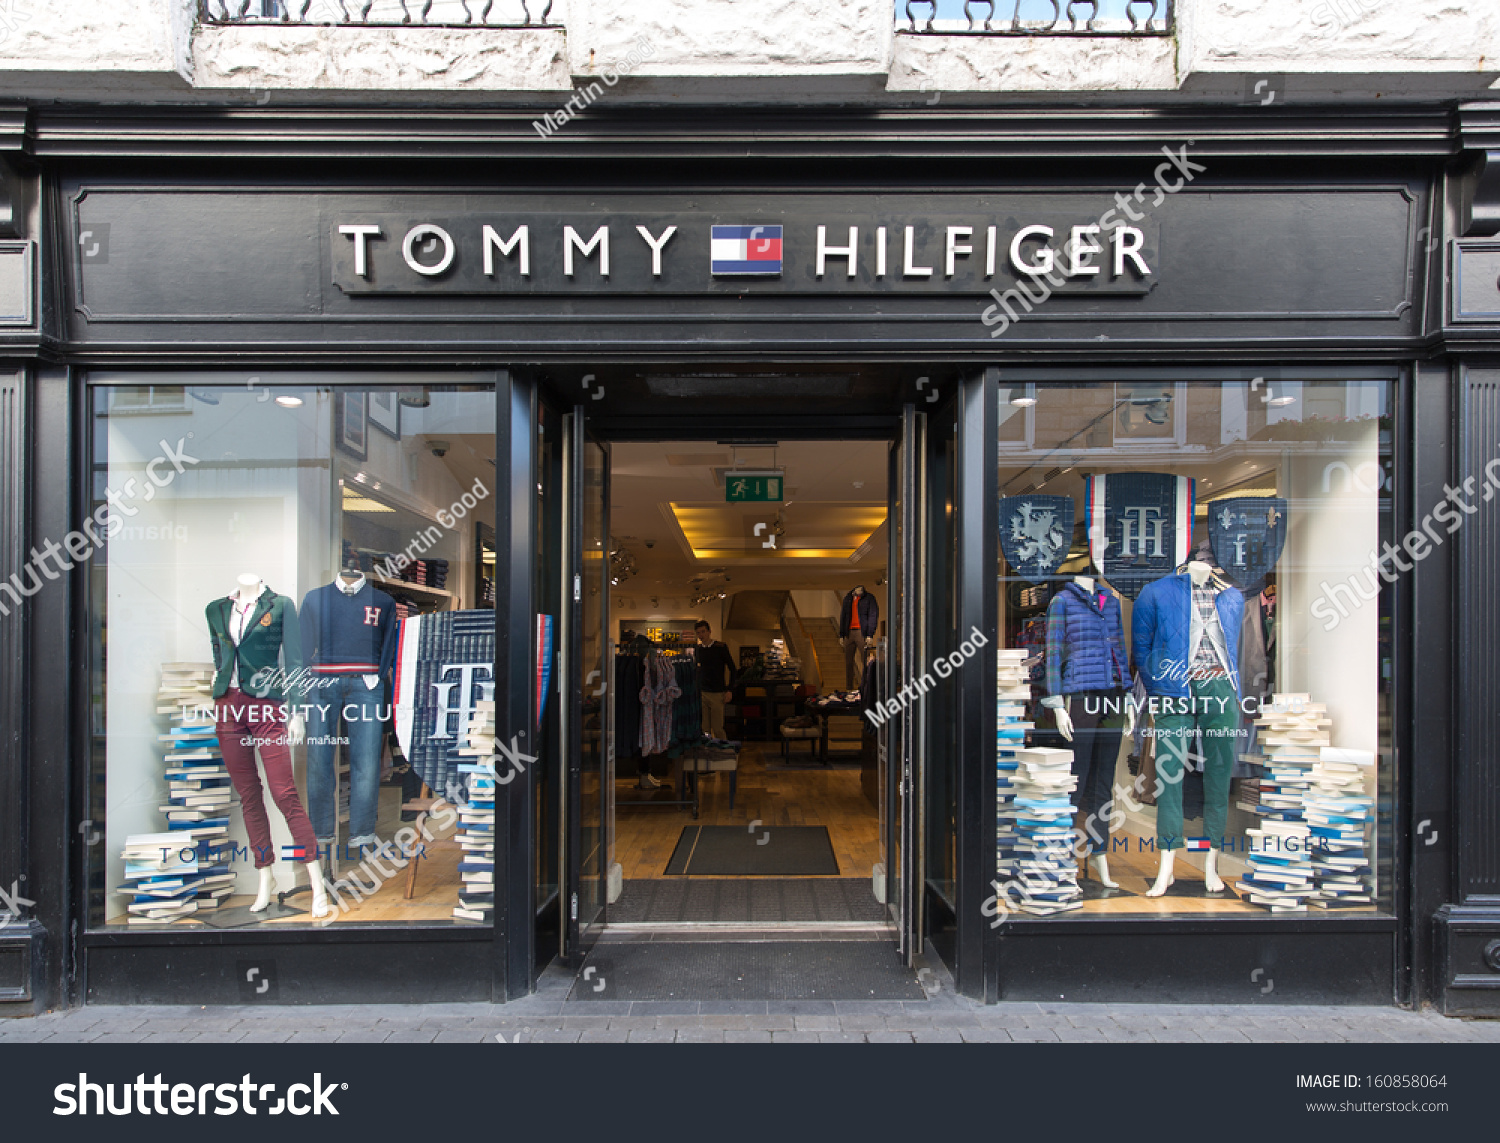 Galway Ireland October Tommy Hilfiger Stock Photo (Edit Now) 160858064